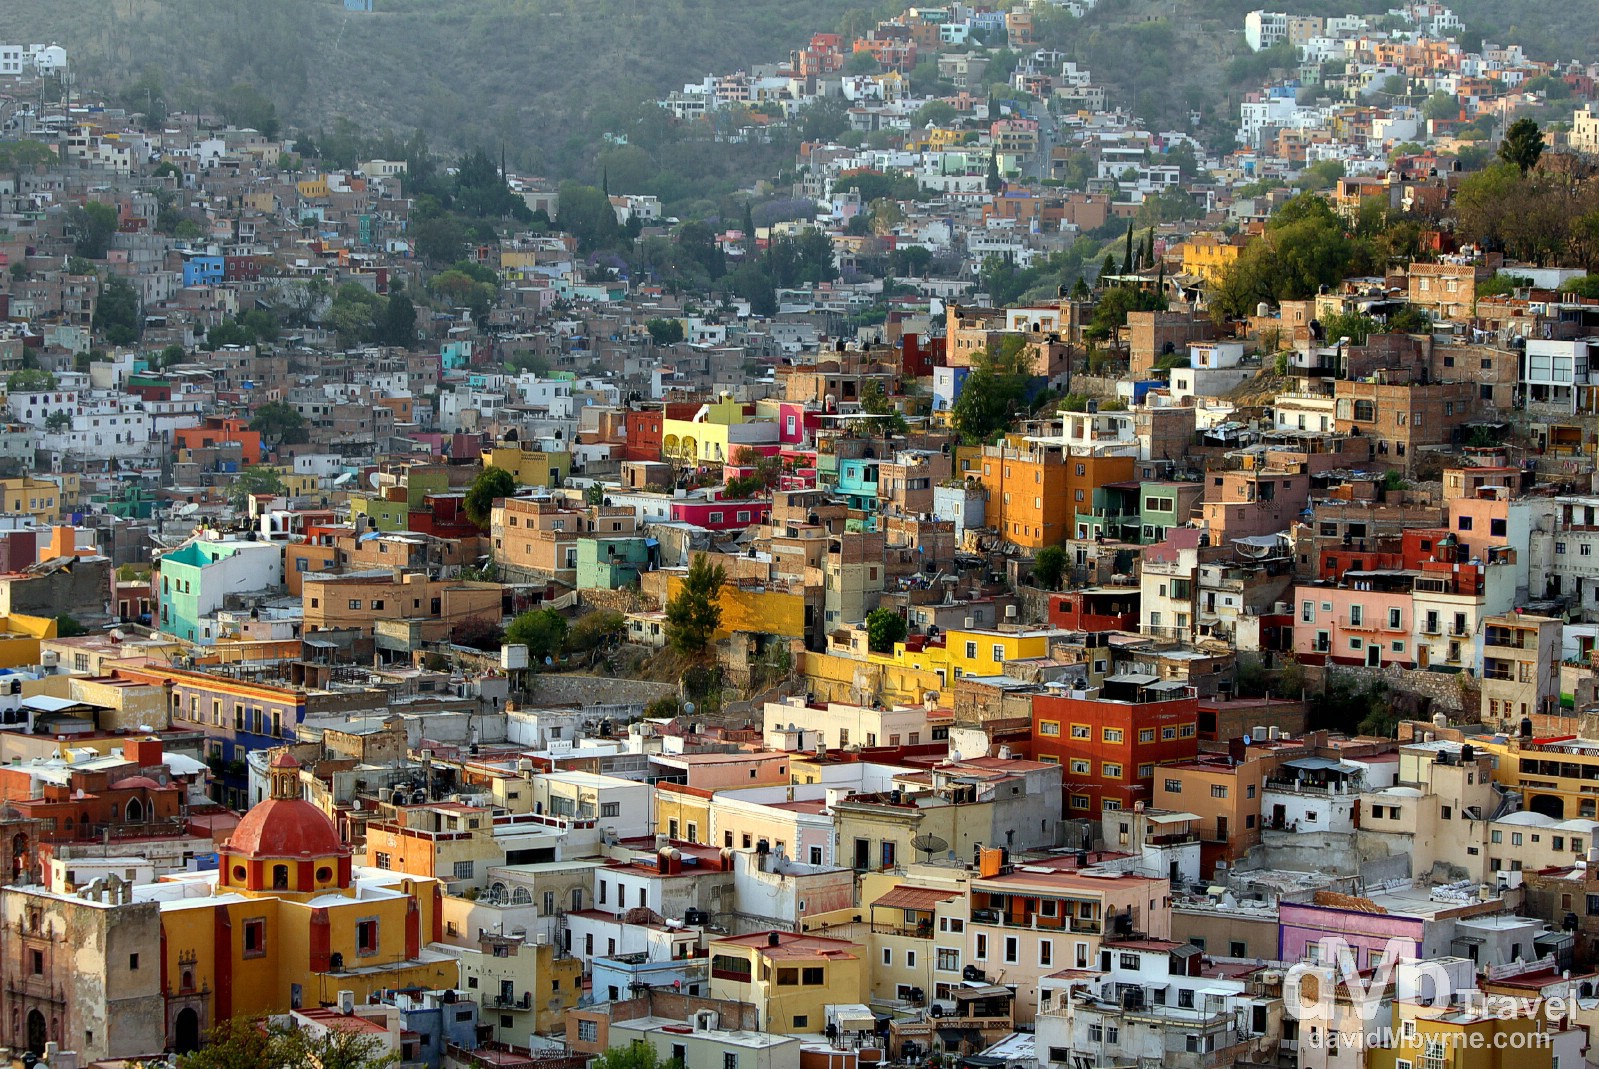 The city of Guanajuato is very compact, which means you can walk just about everywhere of interest. That said, it's very hilly, the result of being located in a ravine in the Sierra de Media Luna - virtually every point in the city is on a slant. But ignore all that. Just walk. Meander the numerous sinuous and narrow streets, all lined with multi-storied, brightly painted colonial homes. Go up those endless stairs, or down into the unknown, through one of the many dark, unique one-way tunnels. Go left, until you hit a dead end. Go back and go right. It'll bring you somewhere fascinating. Explore. Get lost, if you can. It's so much fun. Oh, and don't forget your camera. Please don't forget your camera. Not here. Guanajuato, Mexico. April 23rd 2013.